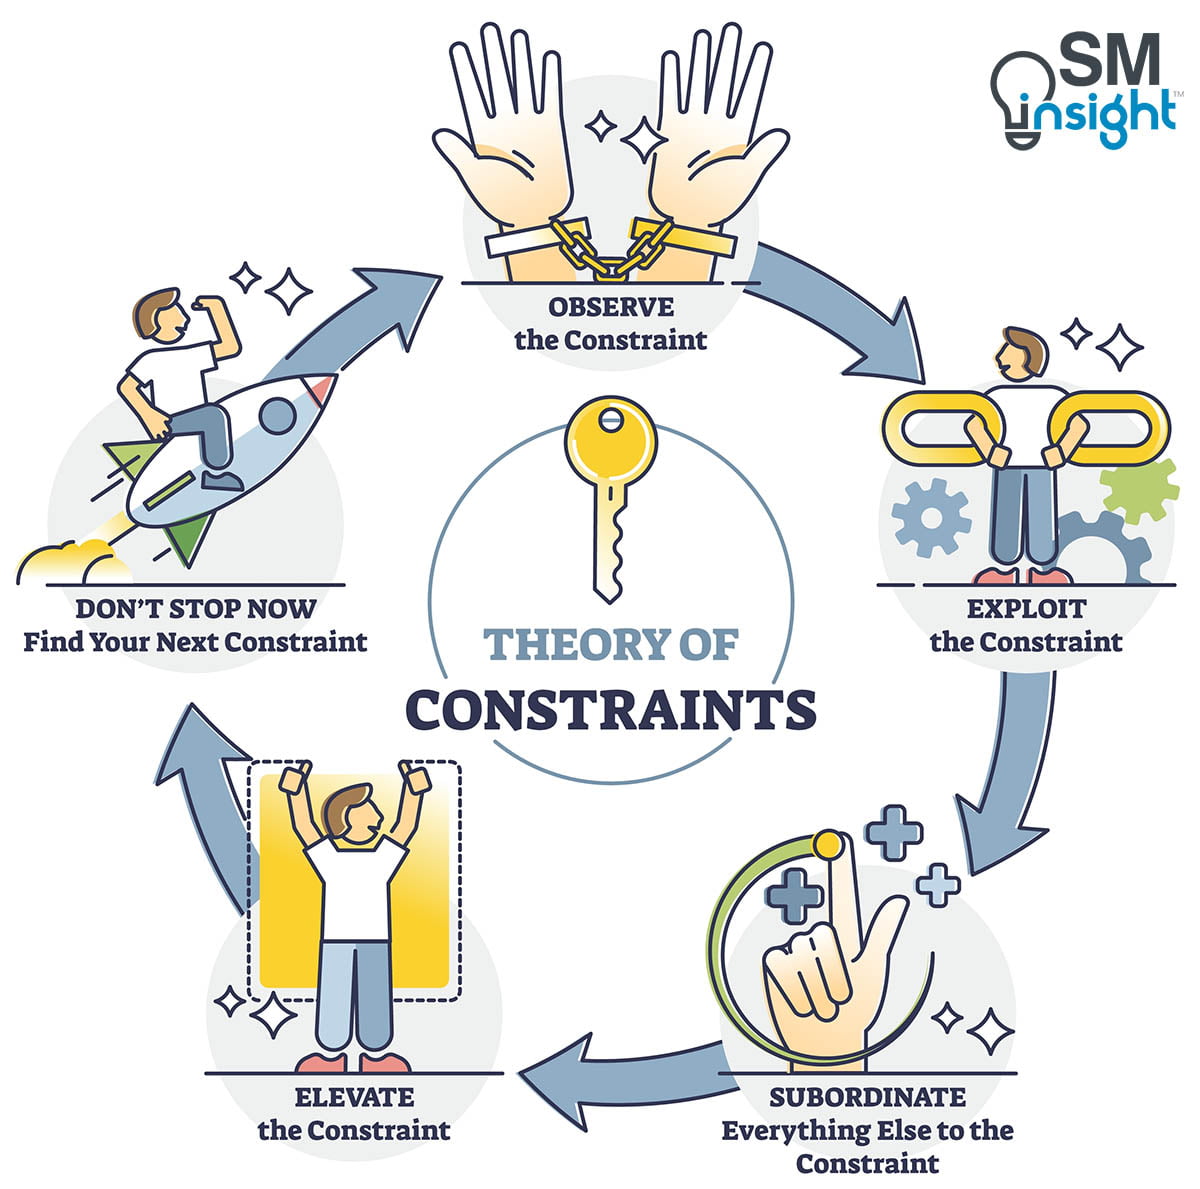 Five Focusing Steps of Theory of Constraints